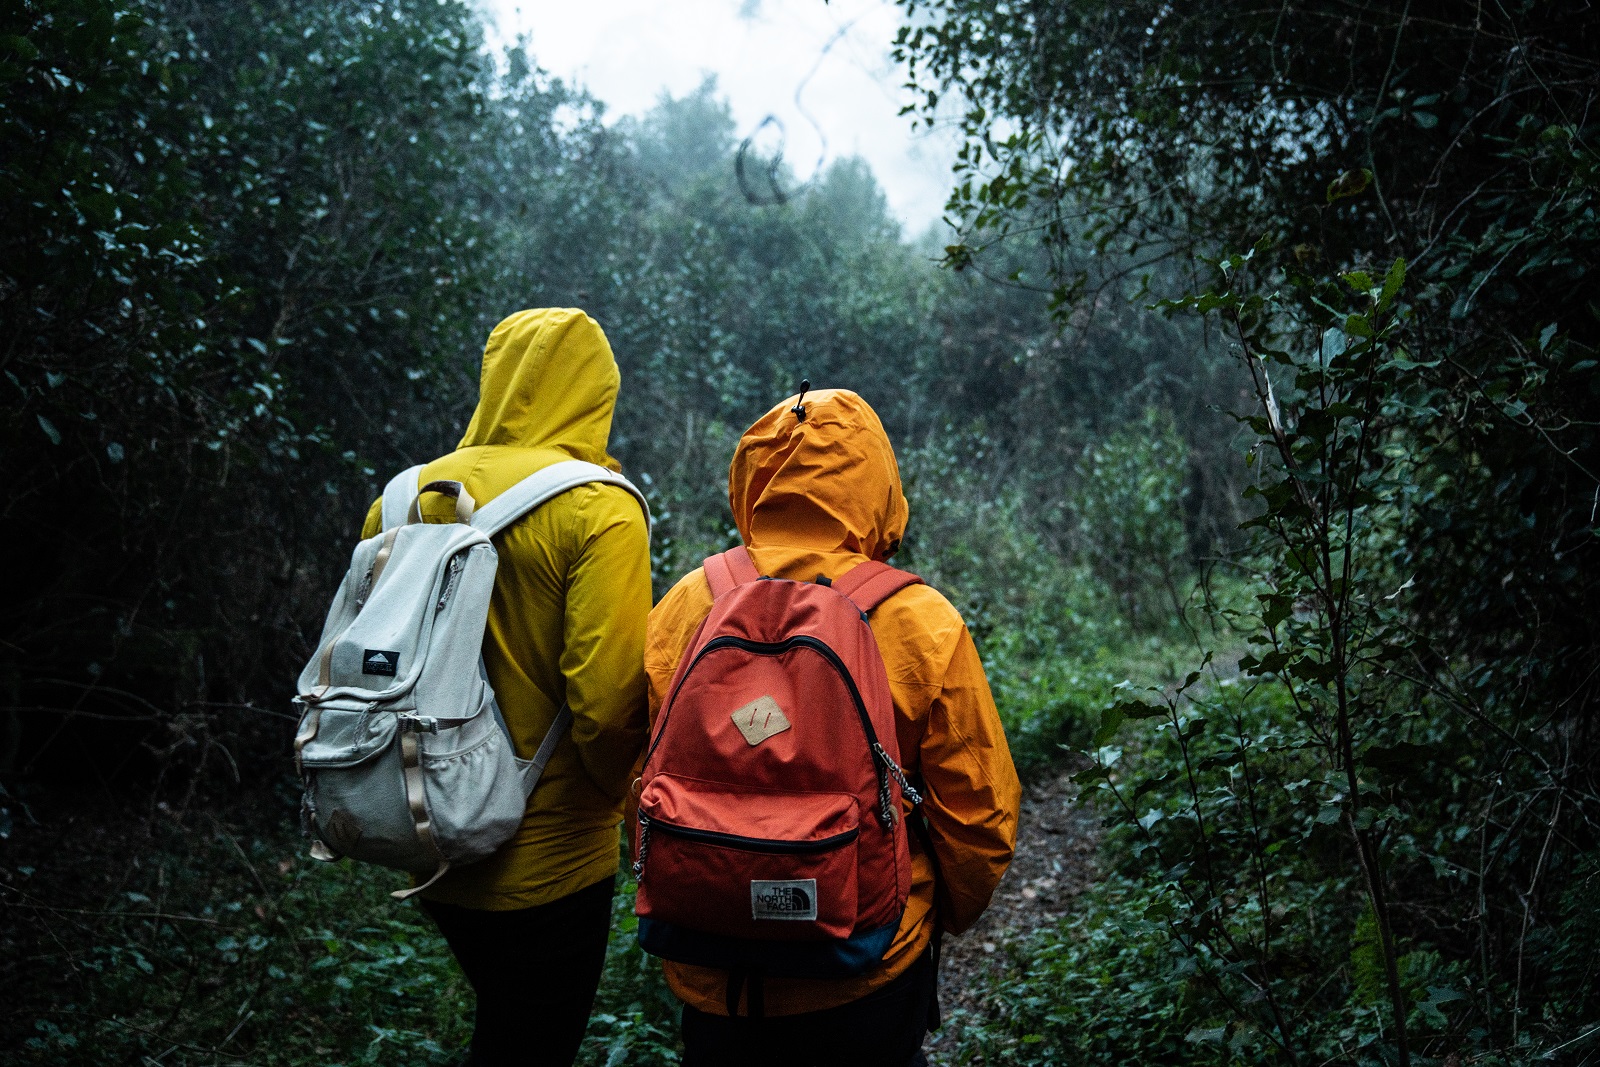 Hiking in the rain to Thunderbolts lookout in Barrington Tops National Park. Photo credit: Rob Mulally/DPIE